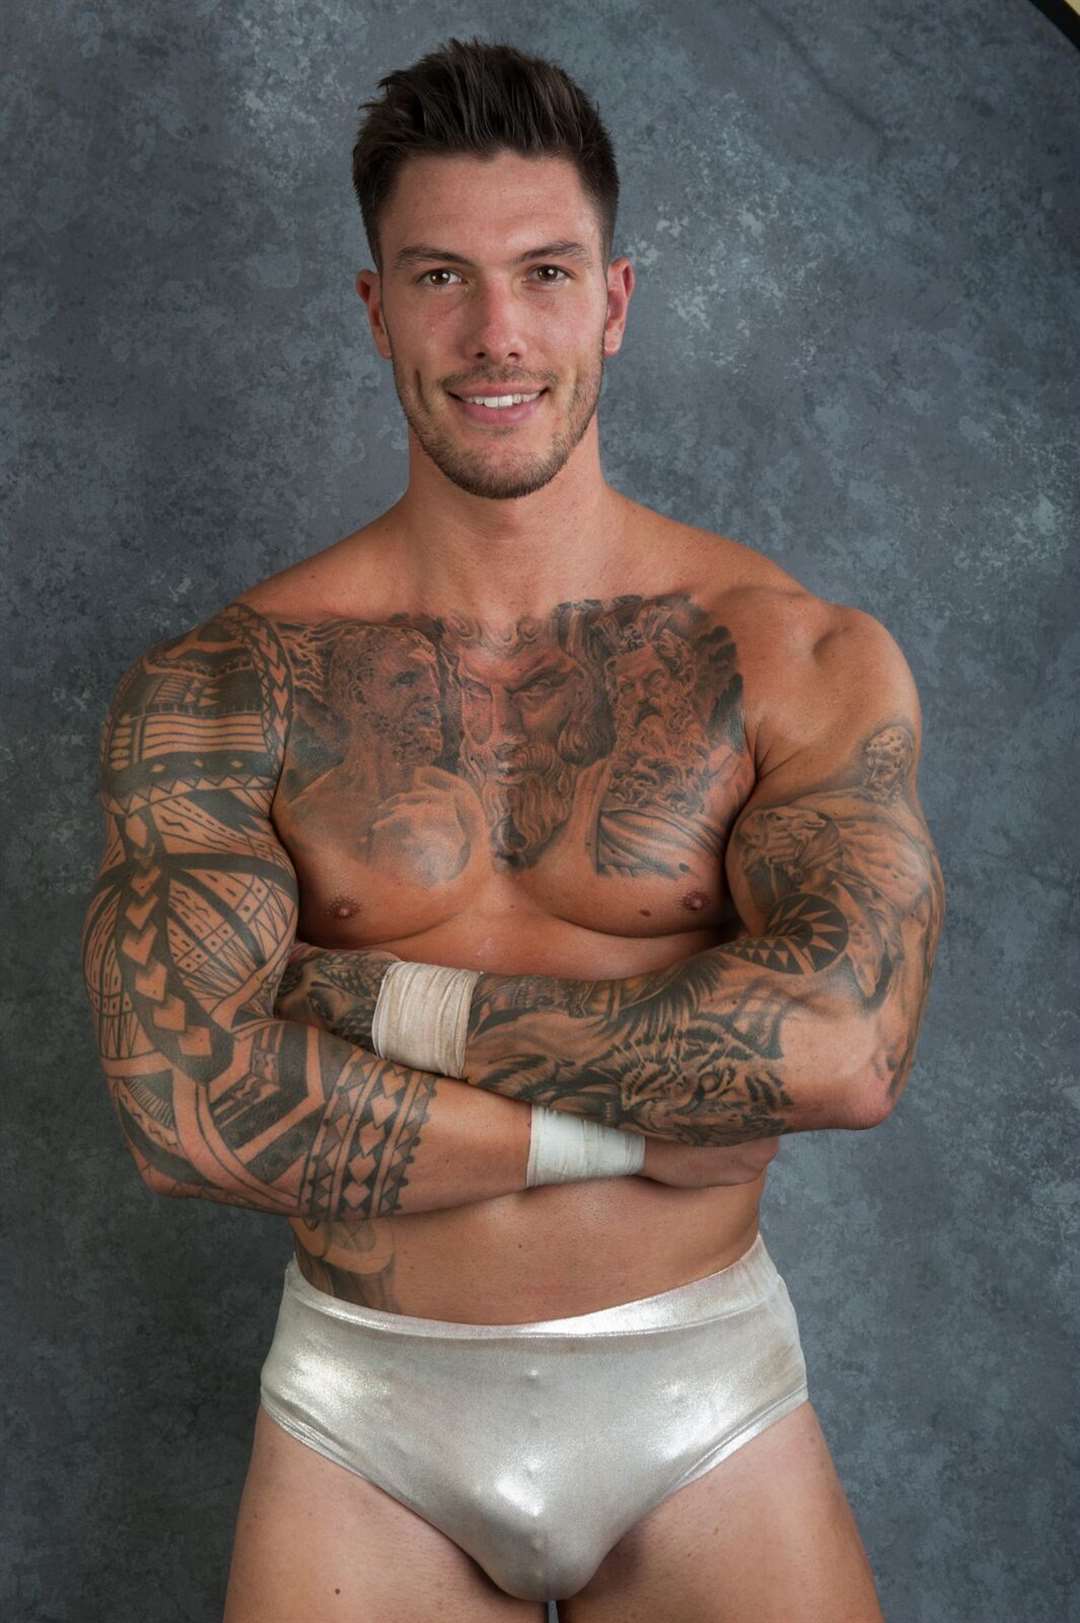 Adam Maxted was in Love Island in 2016